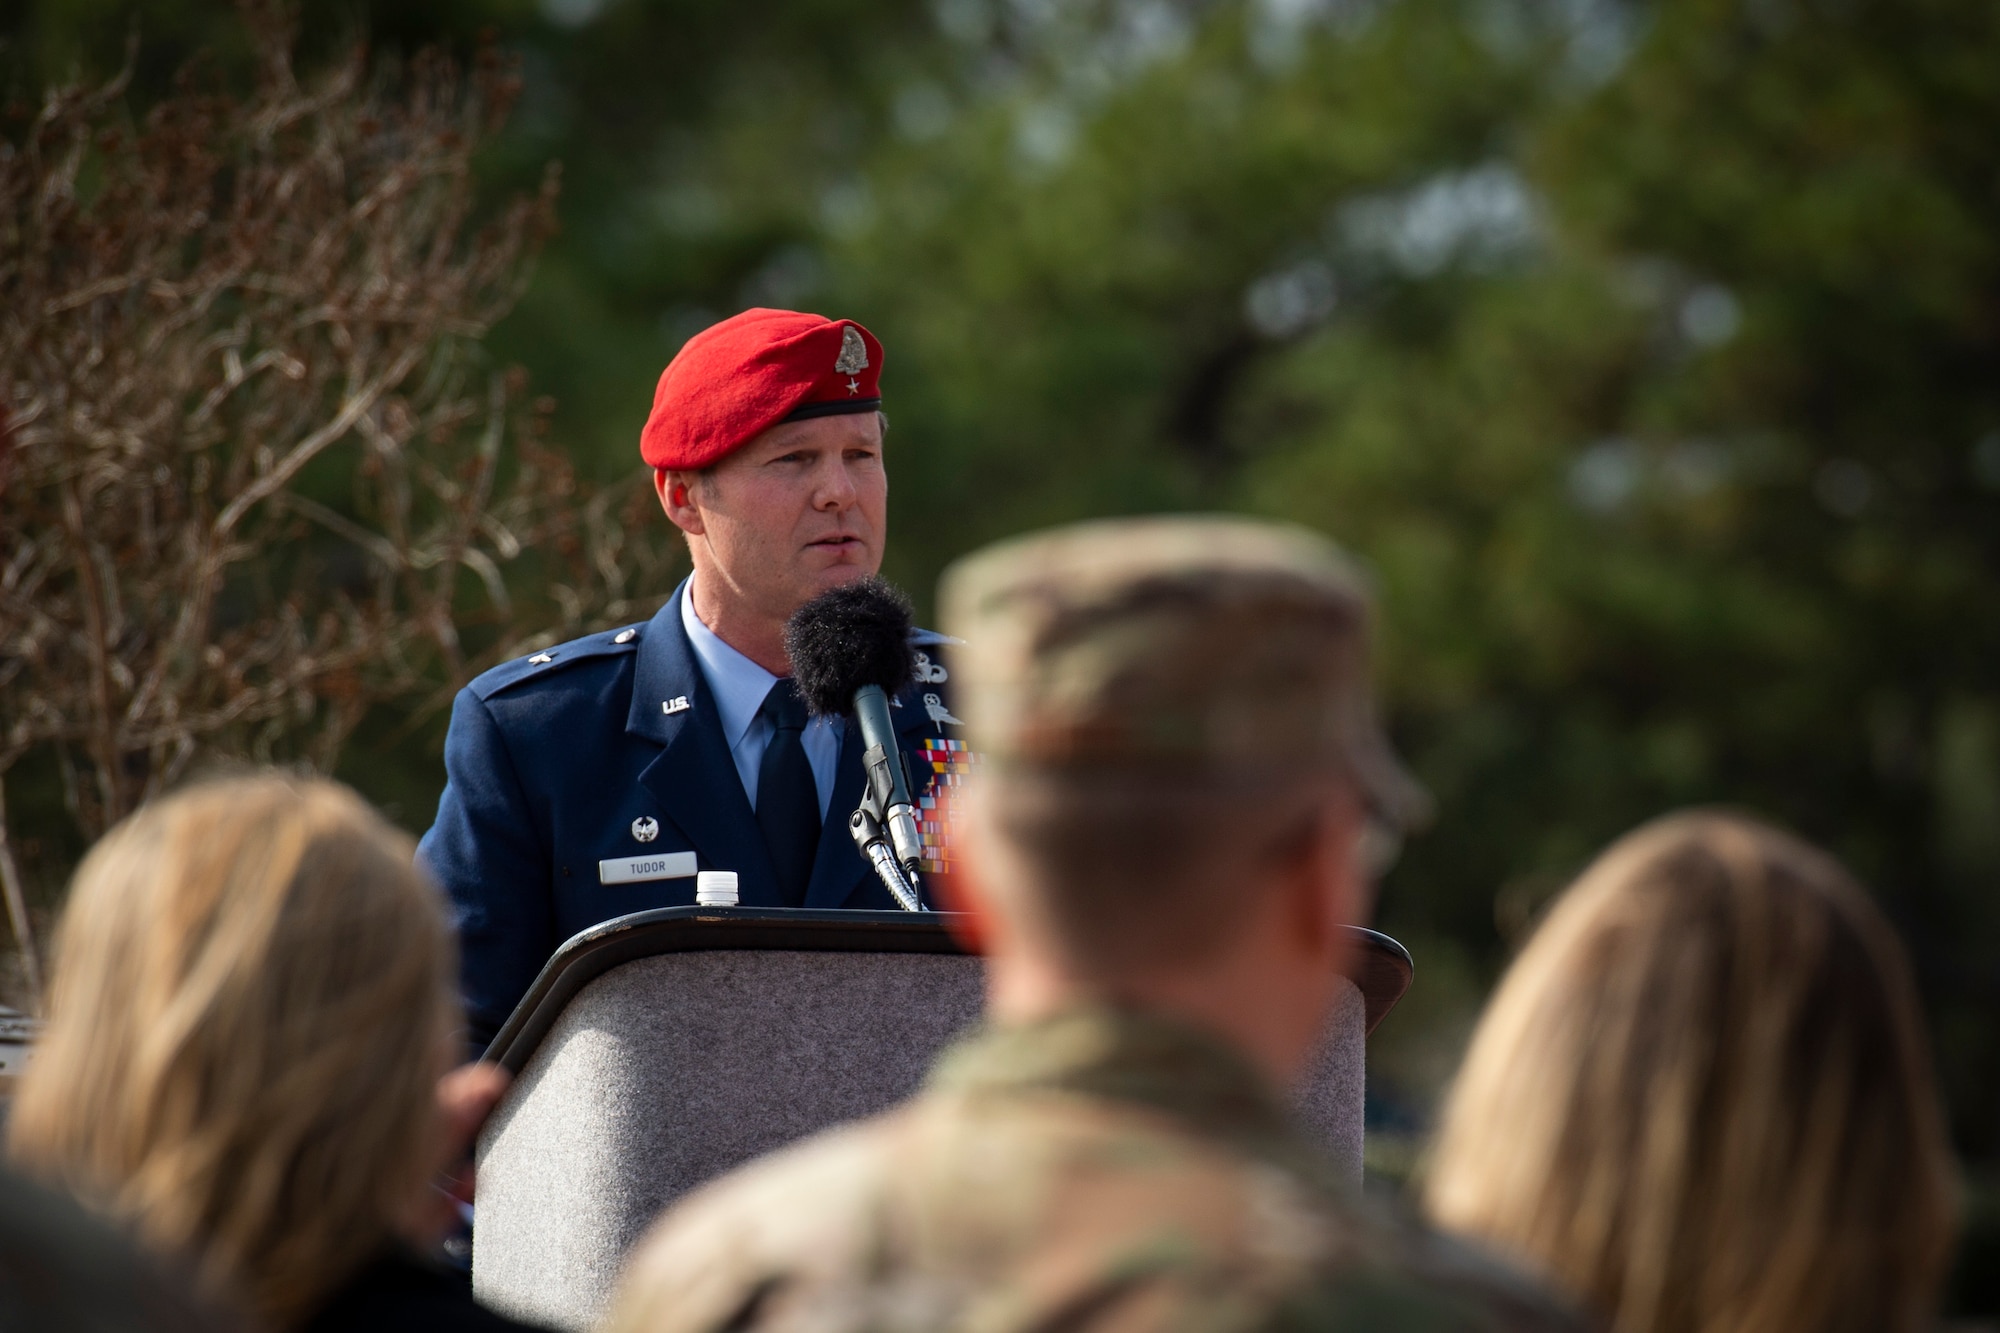 U.S. Air Force Brig. Gen. Claude K. Tudor, Jr., commander of the 24th Special Operations Wing, gives remarks during his promotion ceremony at Hurlburt Field, Florida, Feb. 8, 2019.